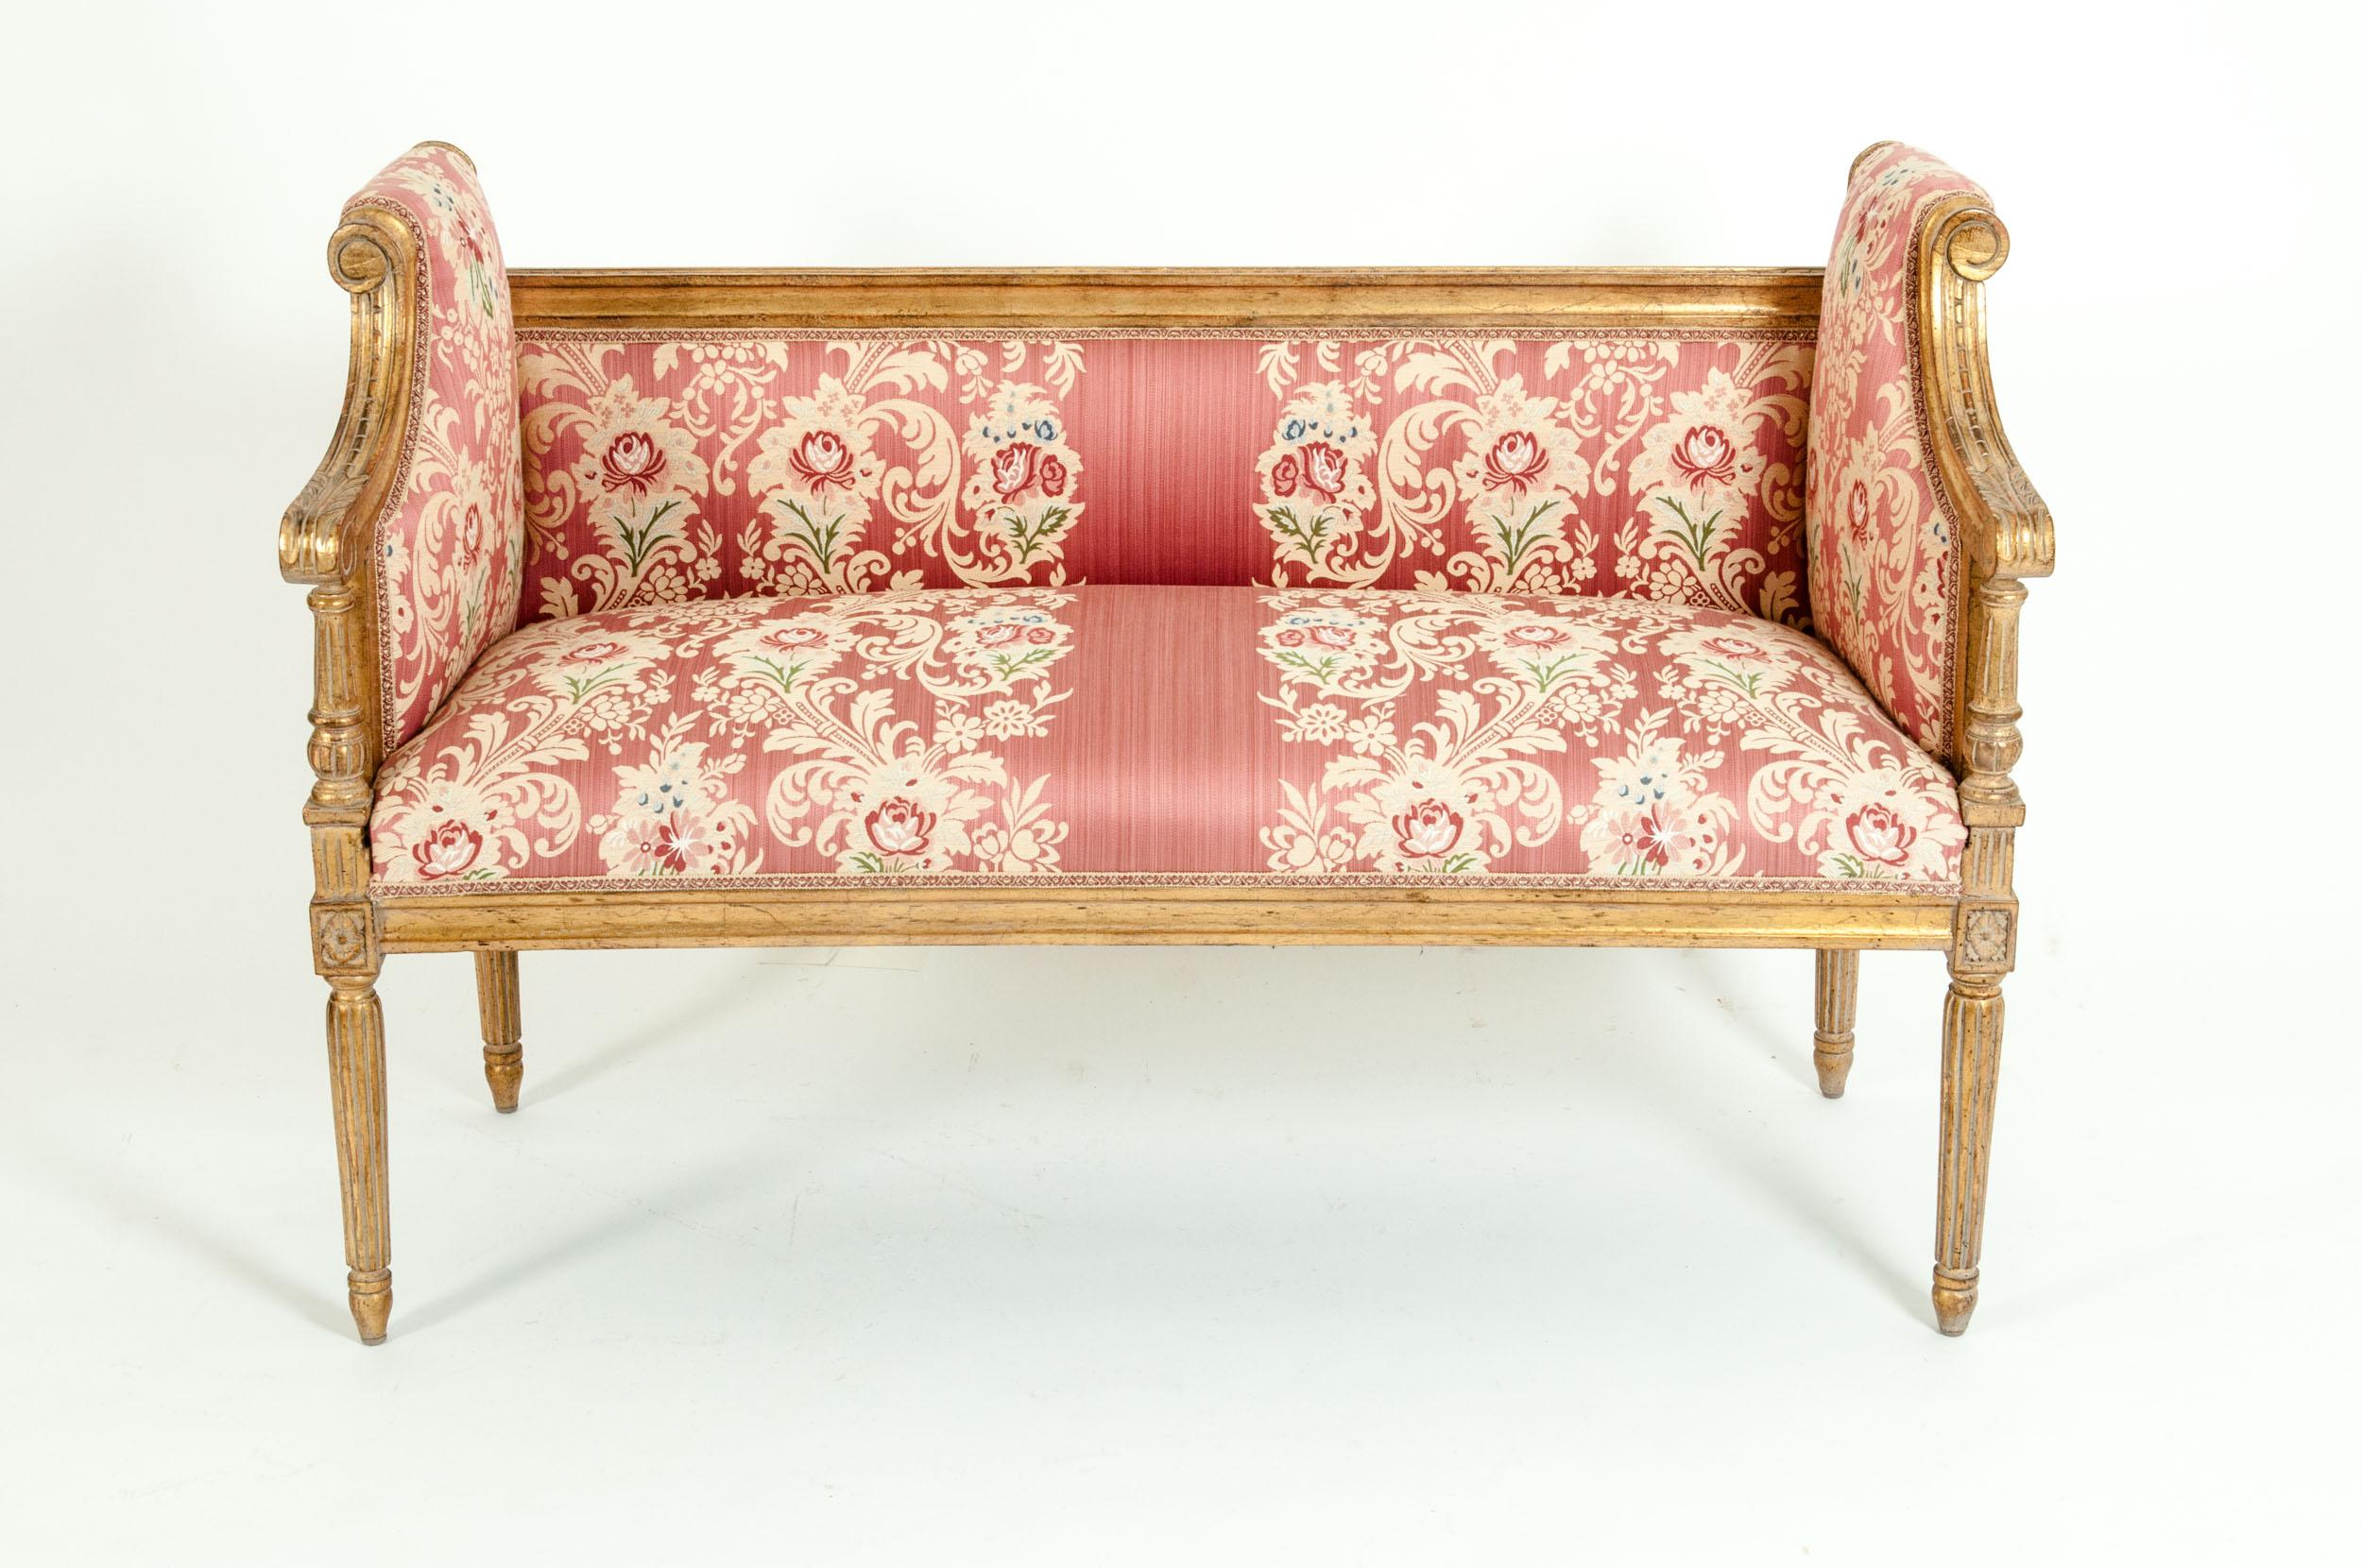 French Louis XVI style giltwood frame settee with rose embroidered silk upholstery. Very immaculate. The settee is very sturdy and in excellent vintage condition. Minor wear consistent with age / use. The settee measure about 47 inches wide X 32